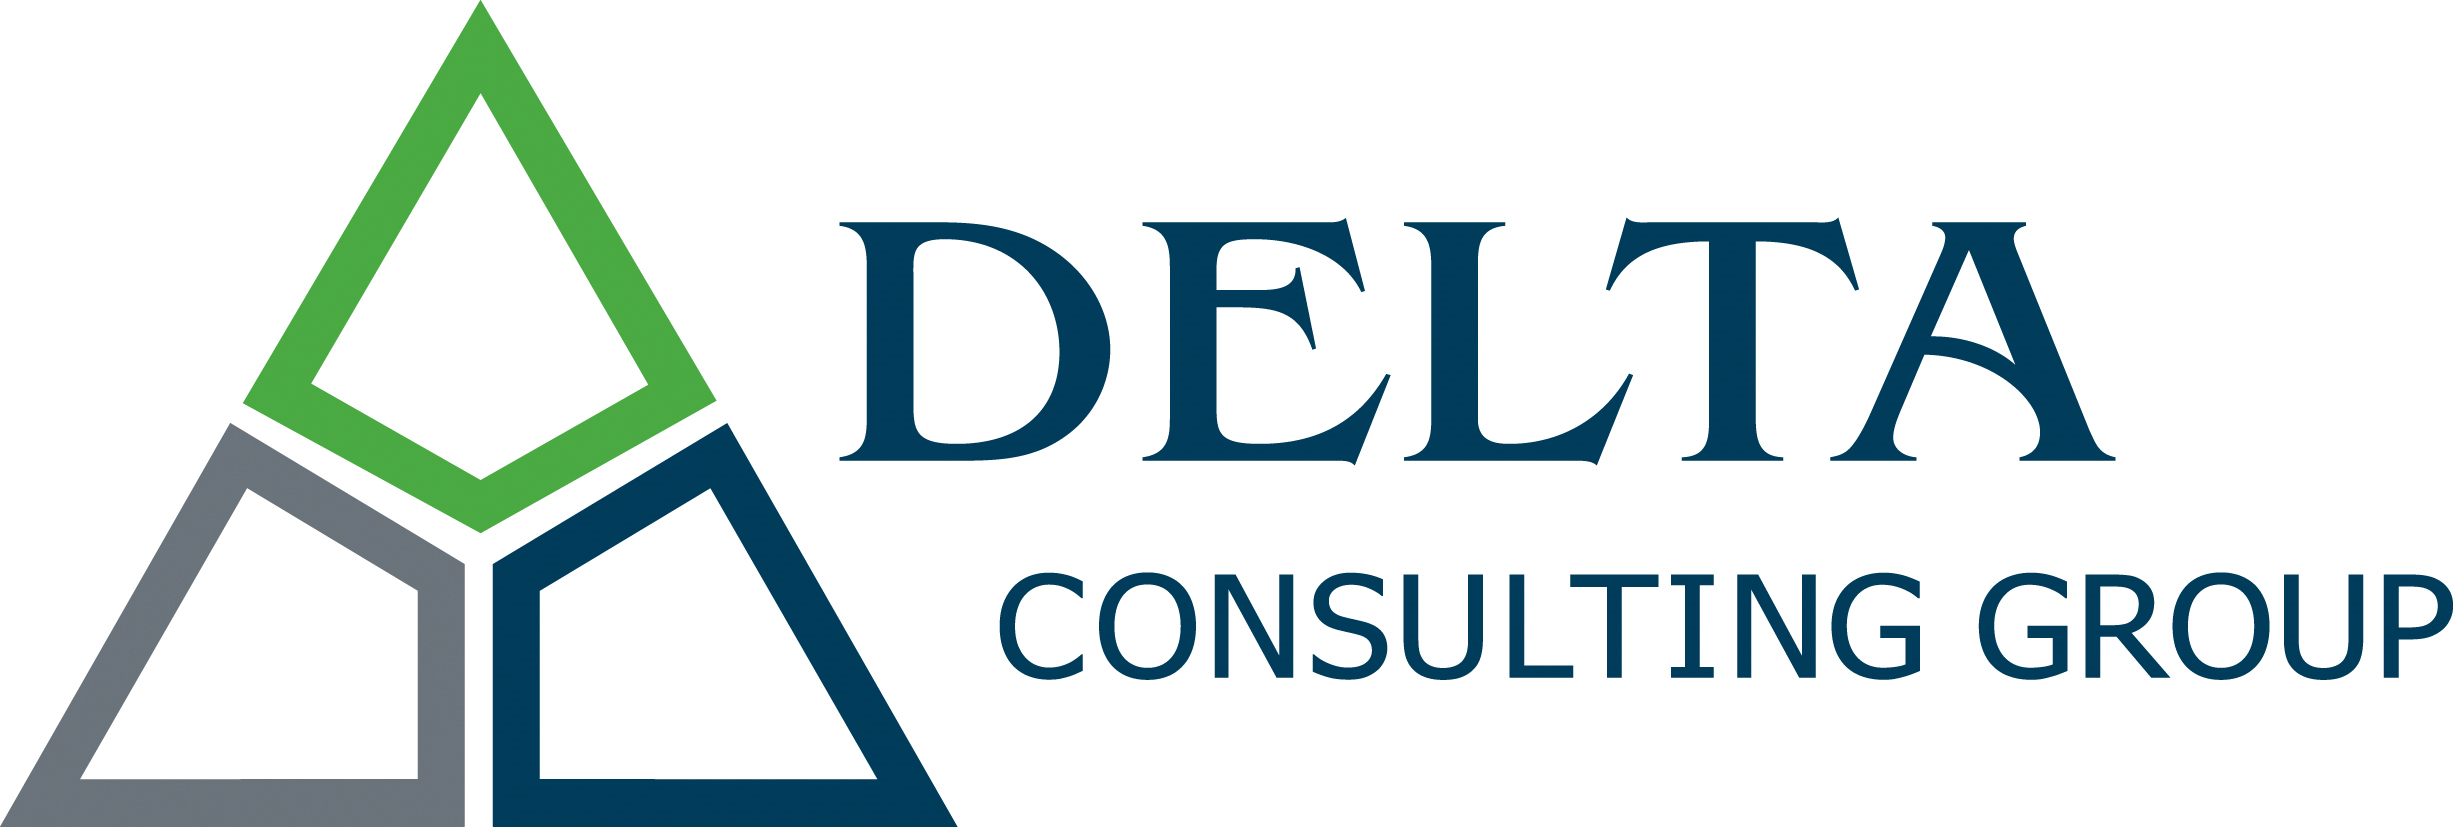 Delta Consulting Group Company Logo